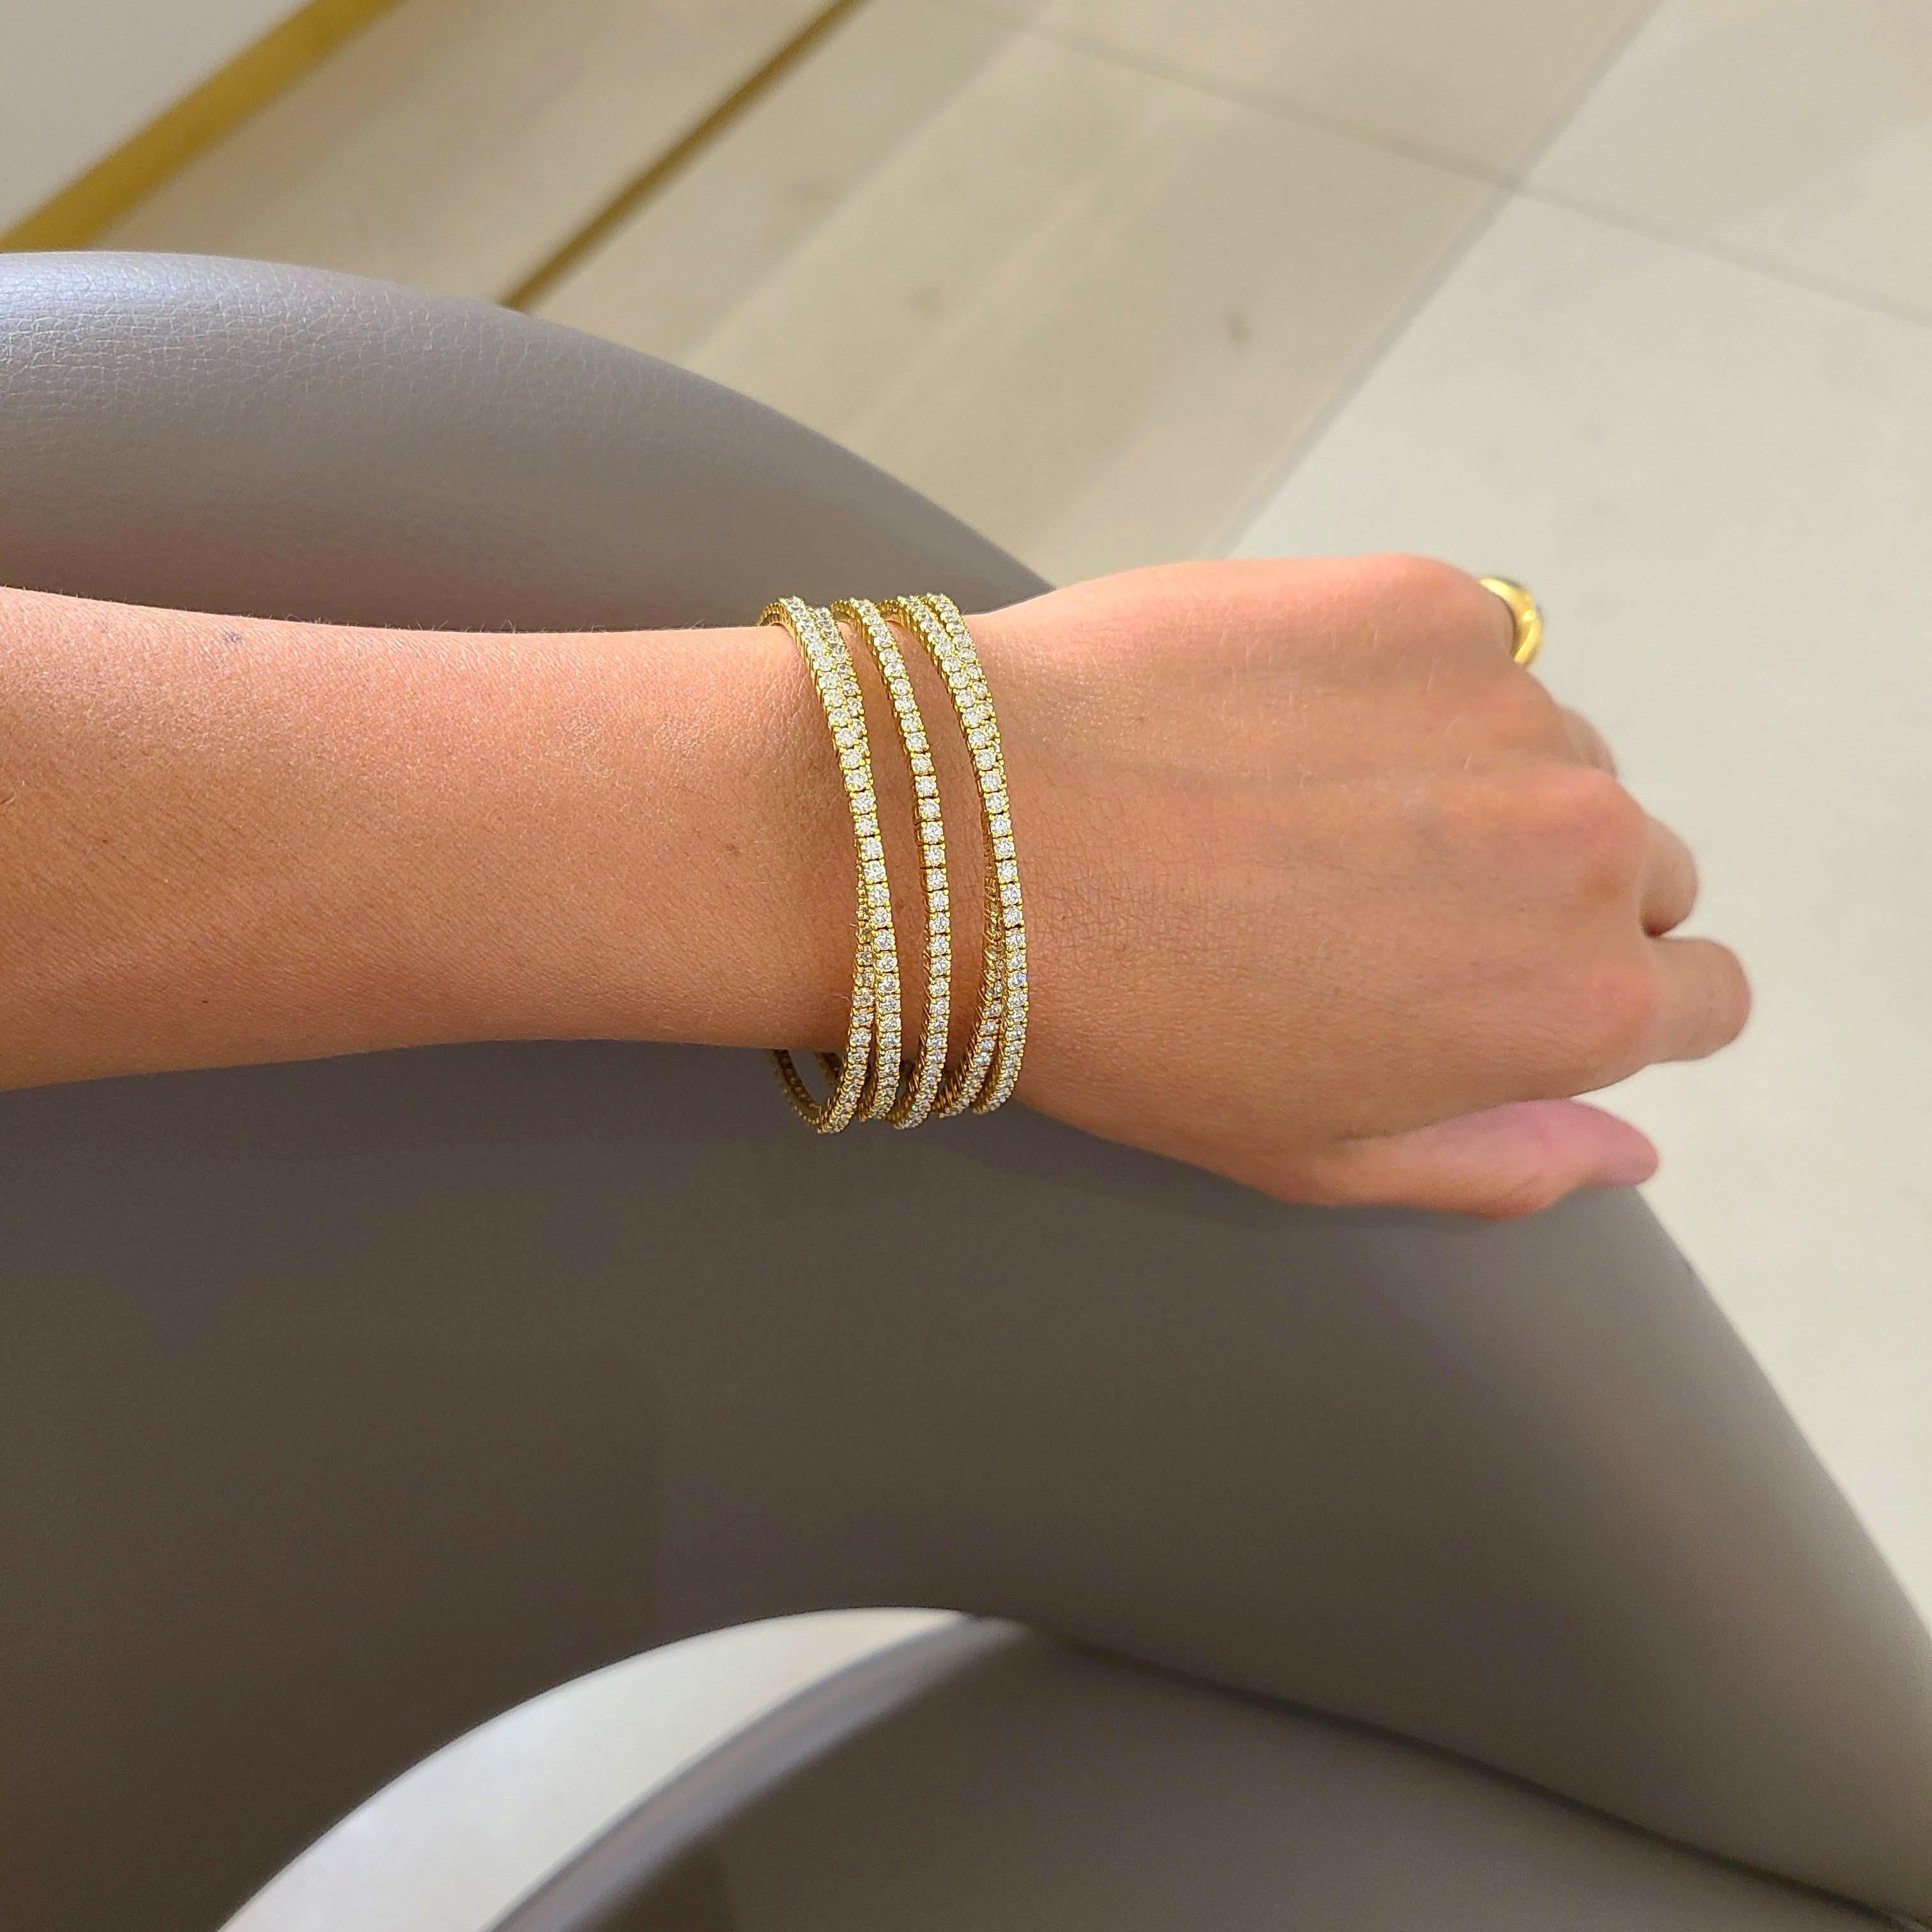 This stunning flexible cuff by Cellini Jewelers NYC is set in 18 karat yellow gold, with 6.72 carats of round brilliant diamonds. The Diamonds are set in five flexible rows which span three quarters around the wrist, making this bracelet an easy to